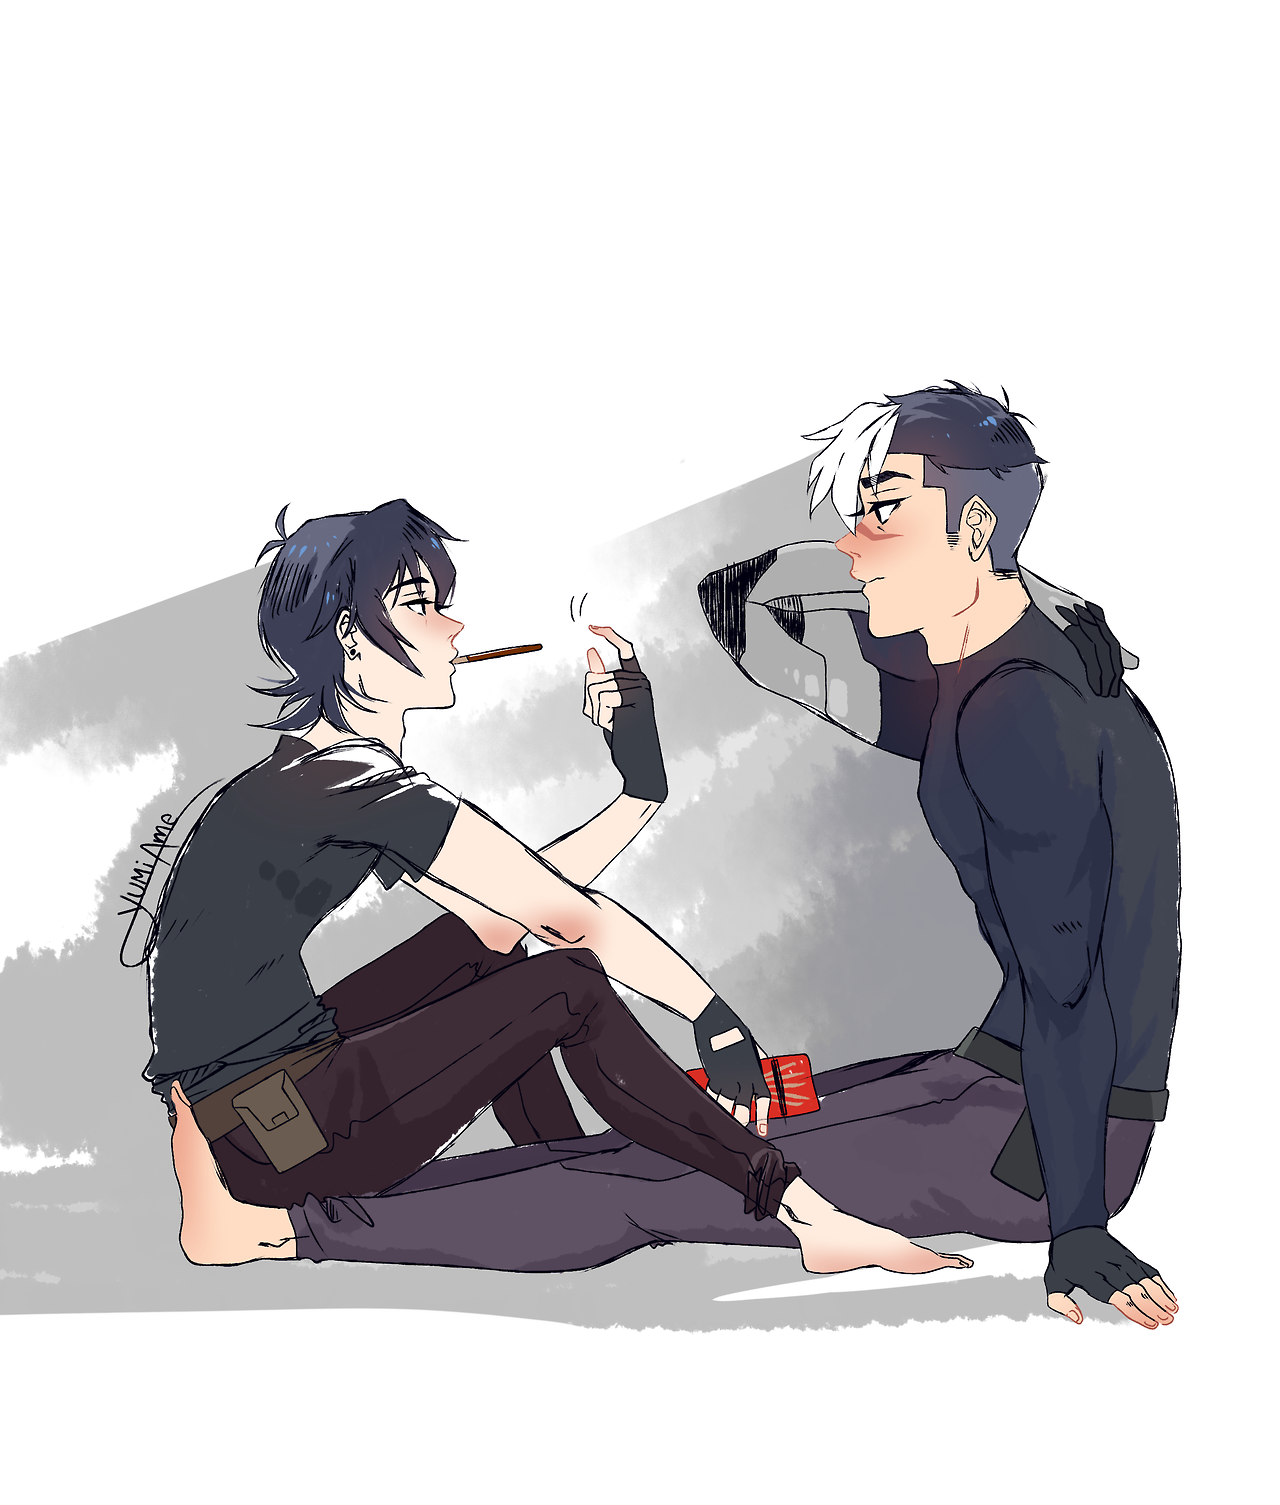 YumiAmes Art Blog Keith Wants To Play The Pocky Game With His